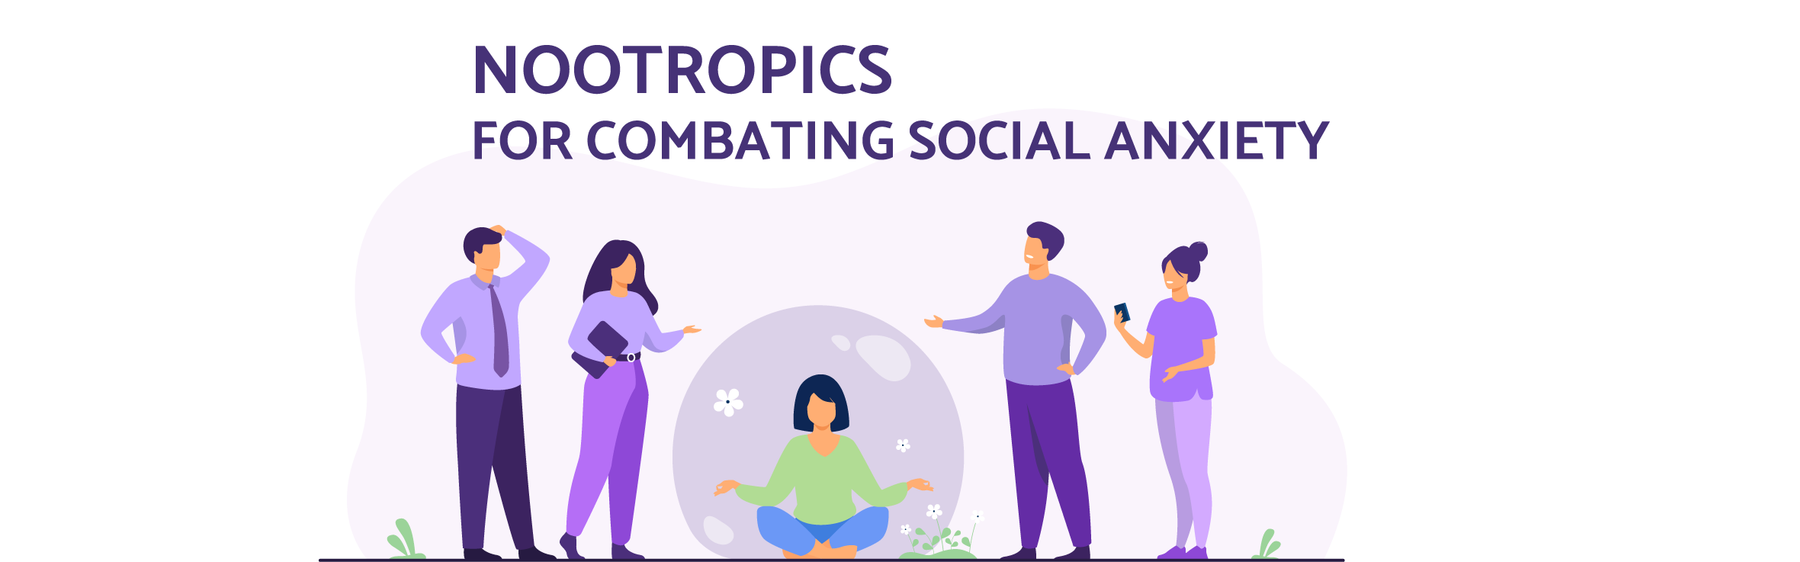 Nootropics for combating social anxiety